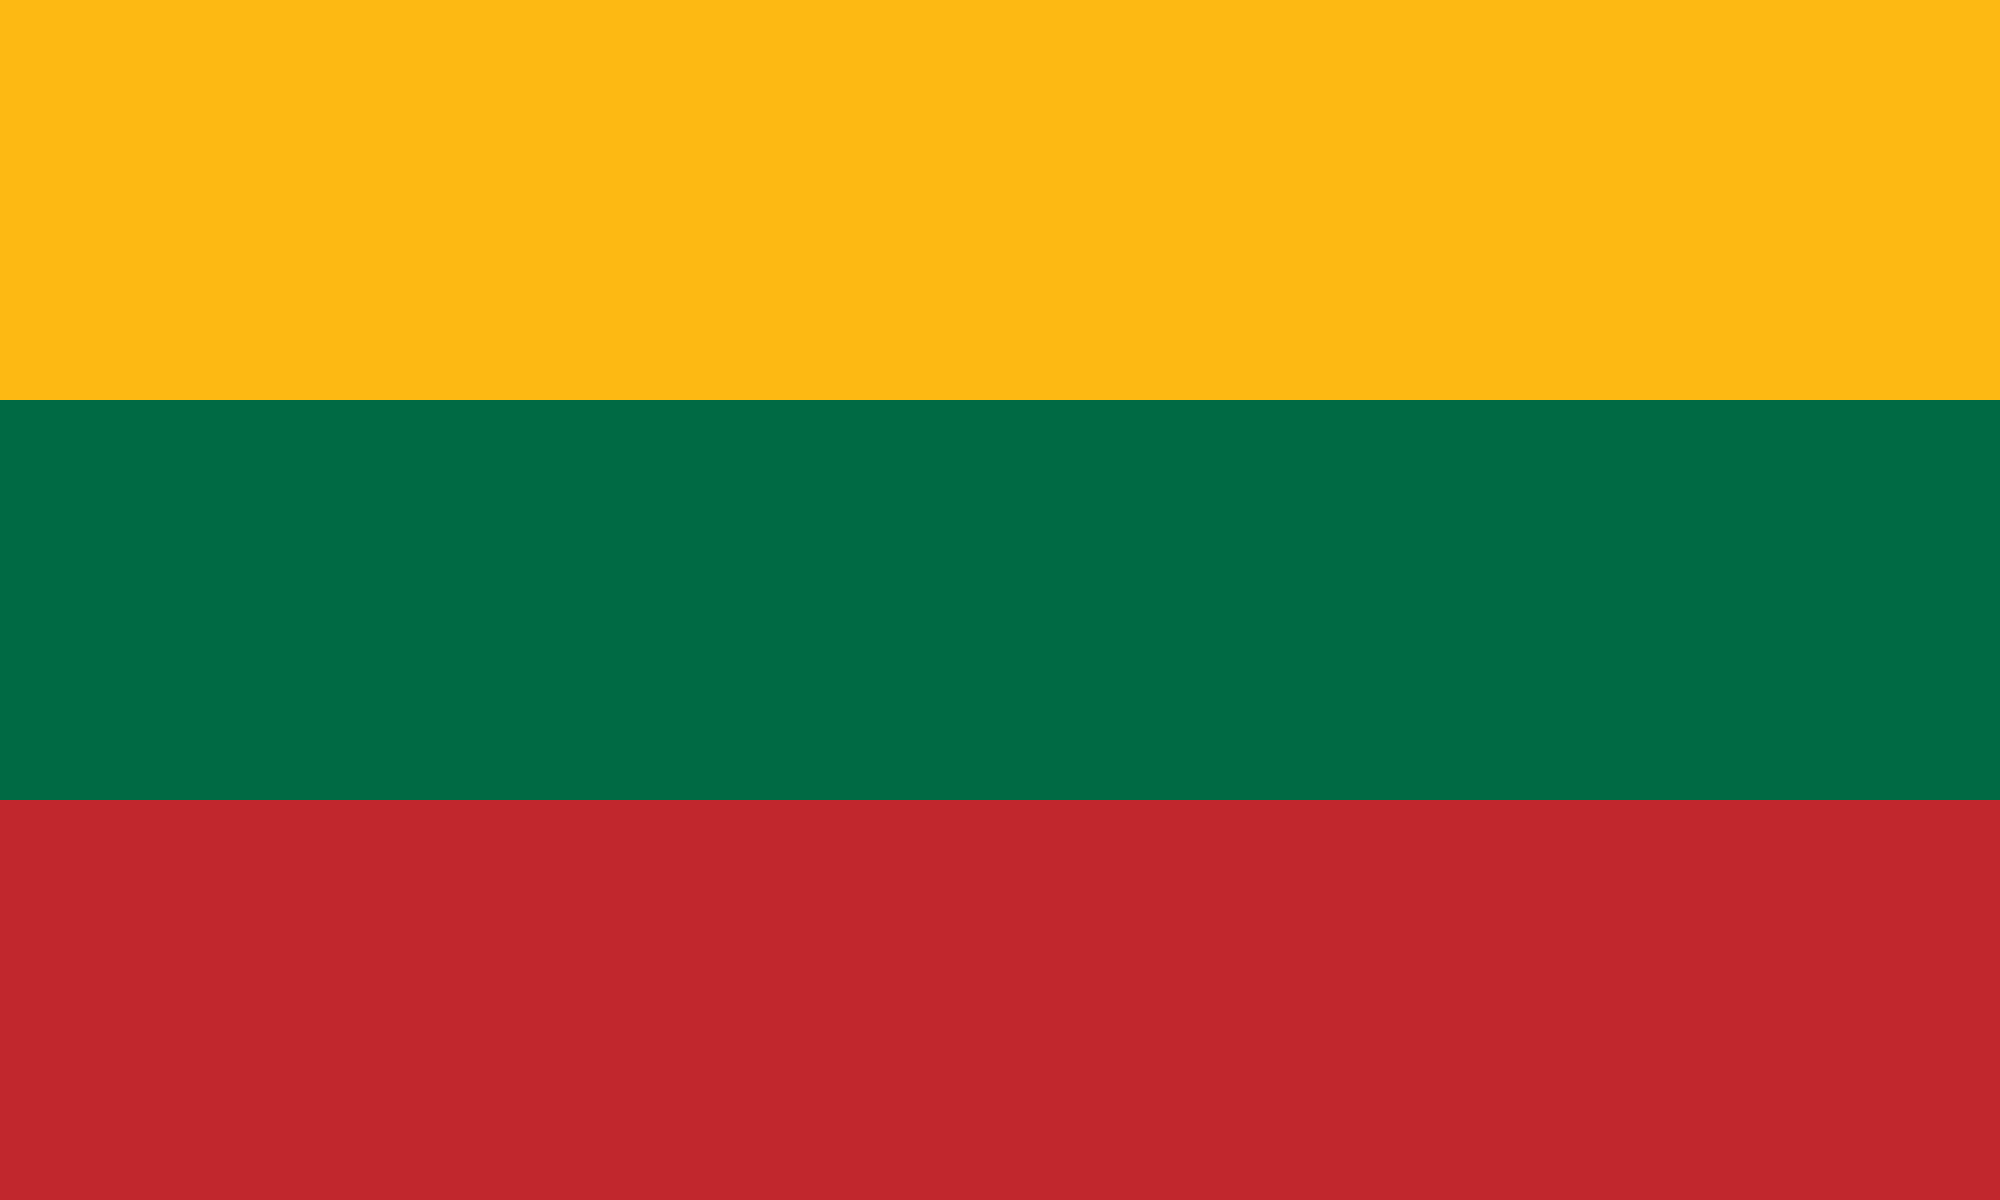 File:Flag of Lithuania.svg - Wikimedia Commons